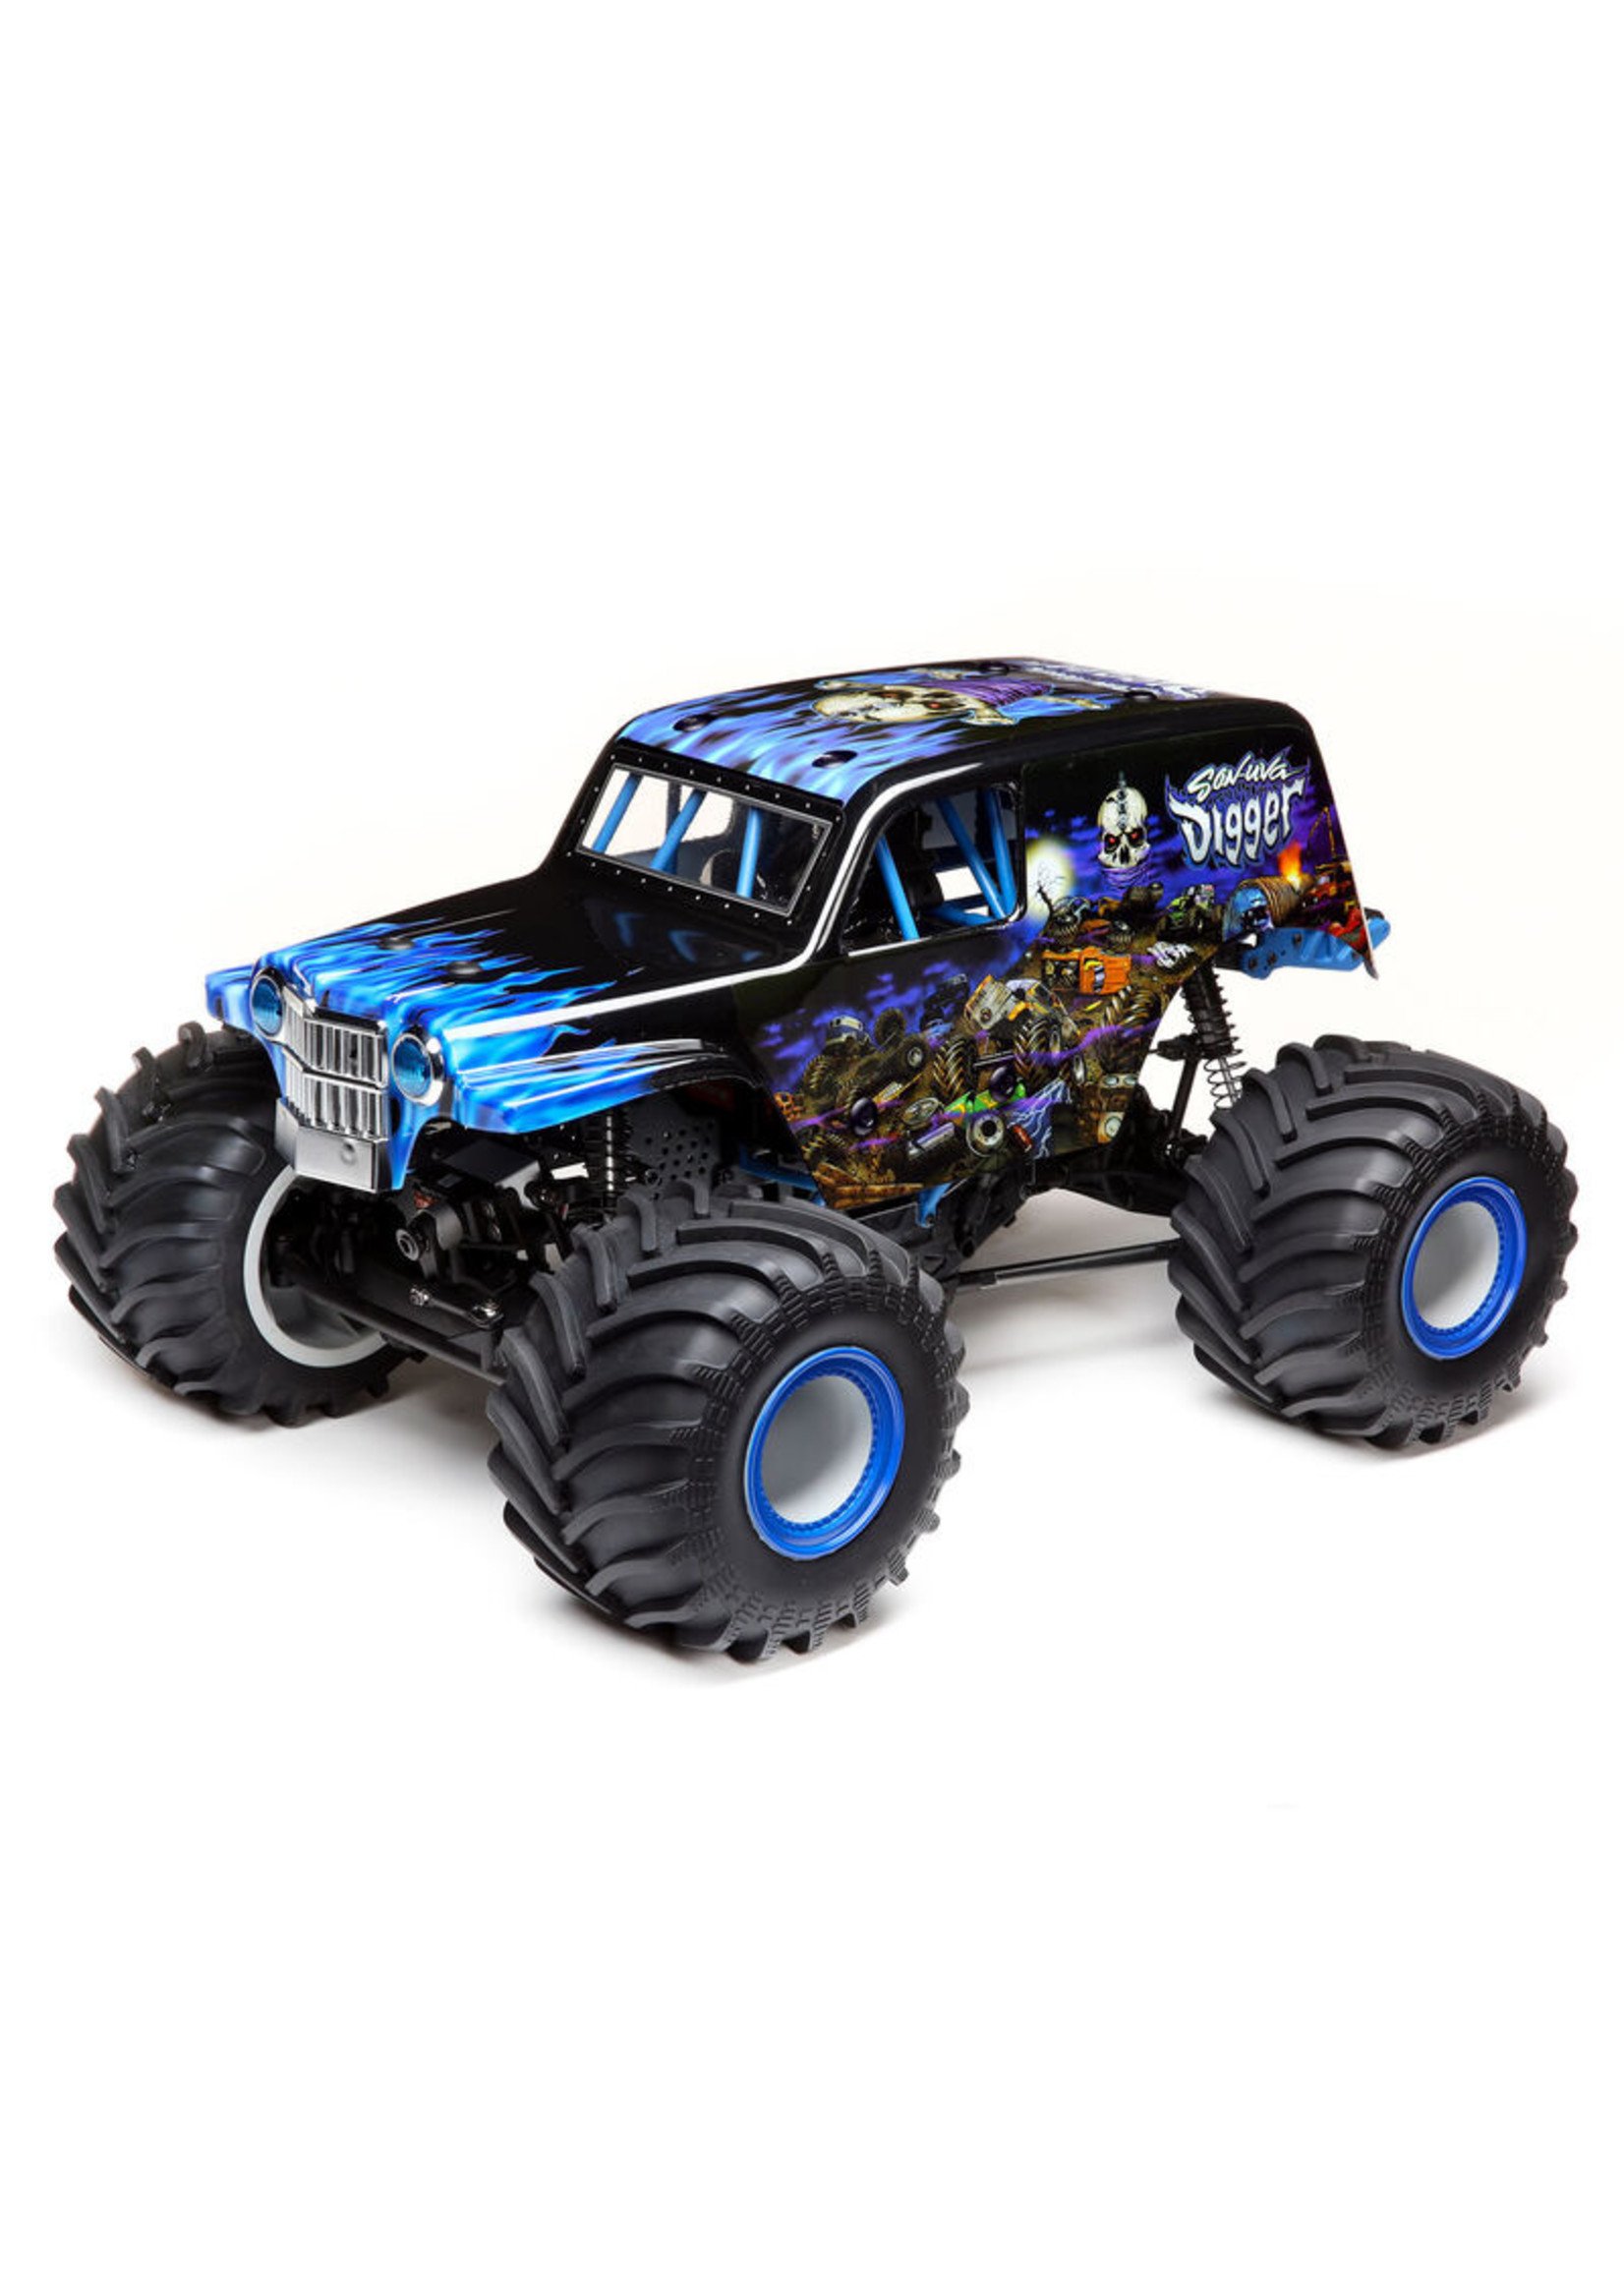 Losi LMT 4WD Solid Axle Monster Truck RTR - Son-uva Digger